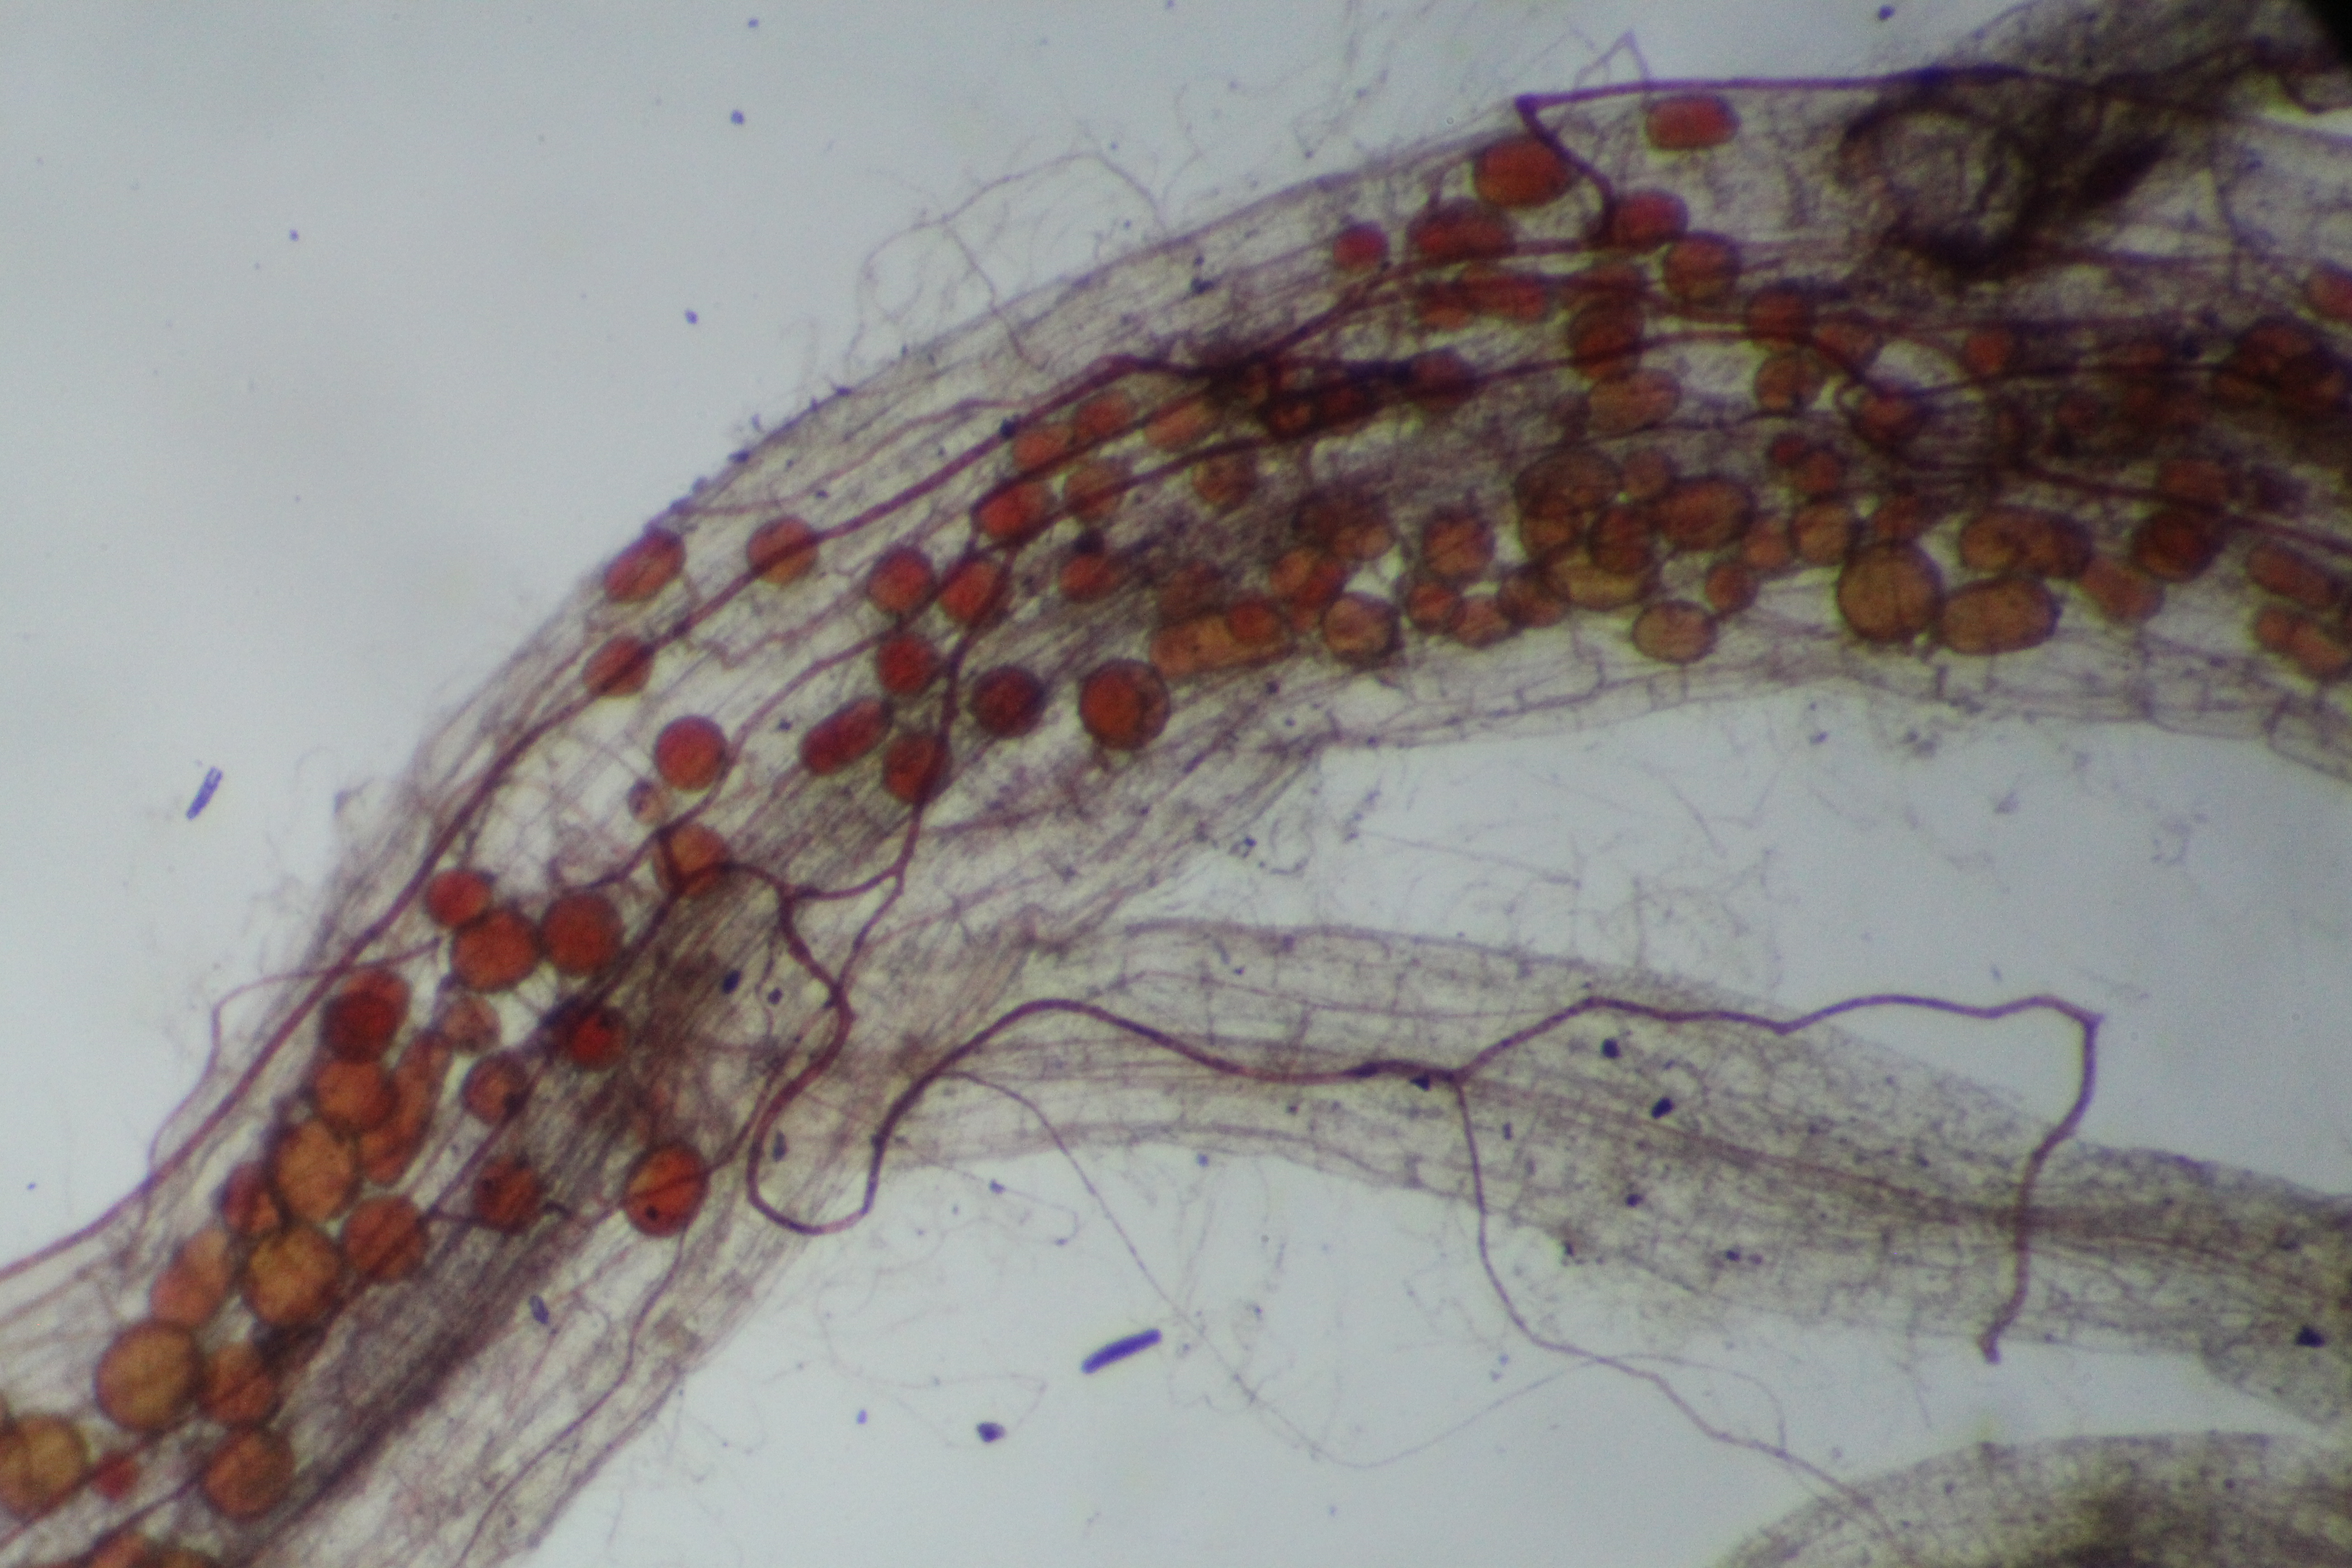 Symbiosis between mycorrhizal fungi and vegetable fine roots. © INOQ GmbH